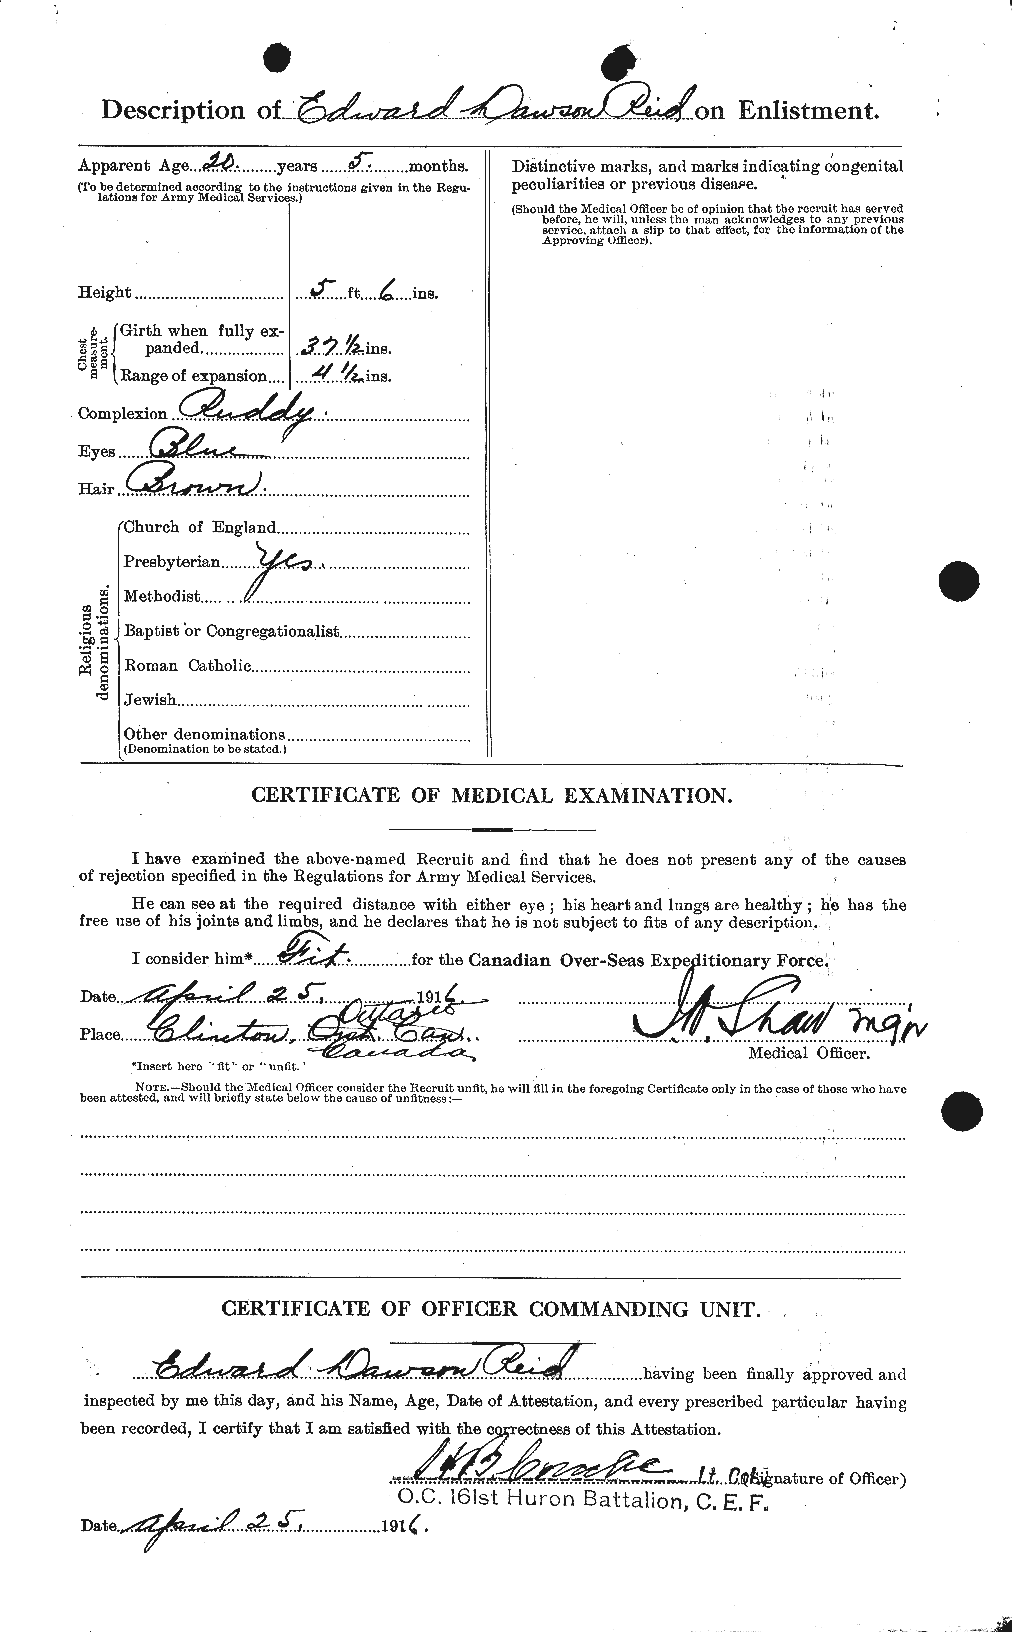 Personnel Records of the First World War - CEF 597985b